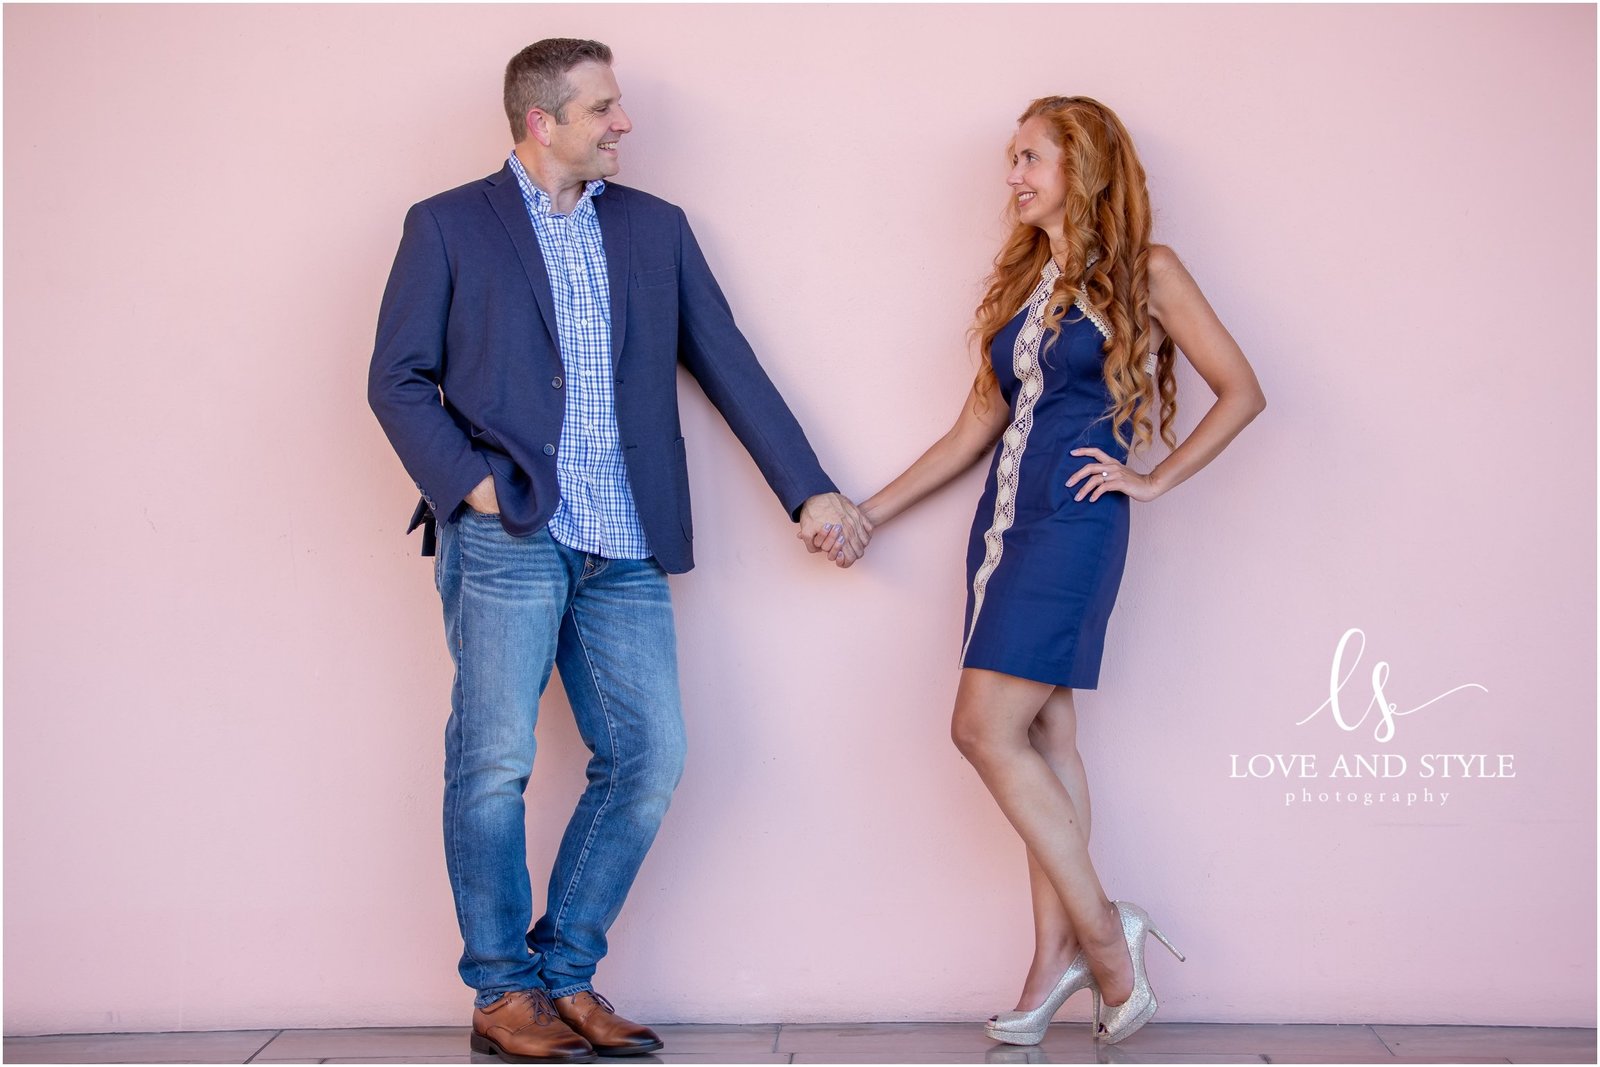 Engagement Photography at The Ringling Museum in Sarasota, Florida